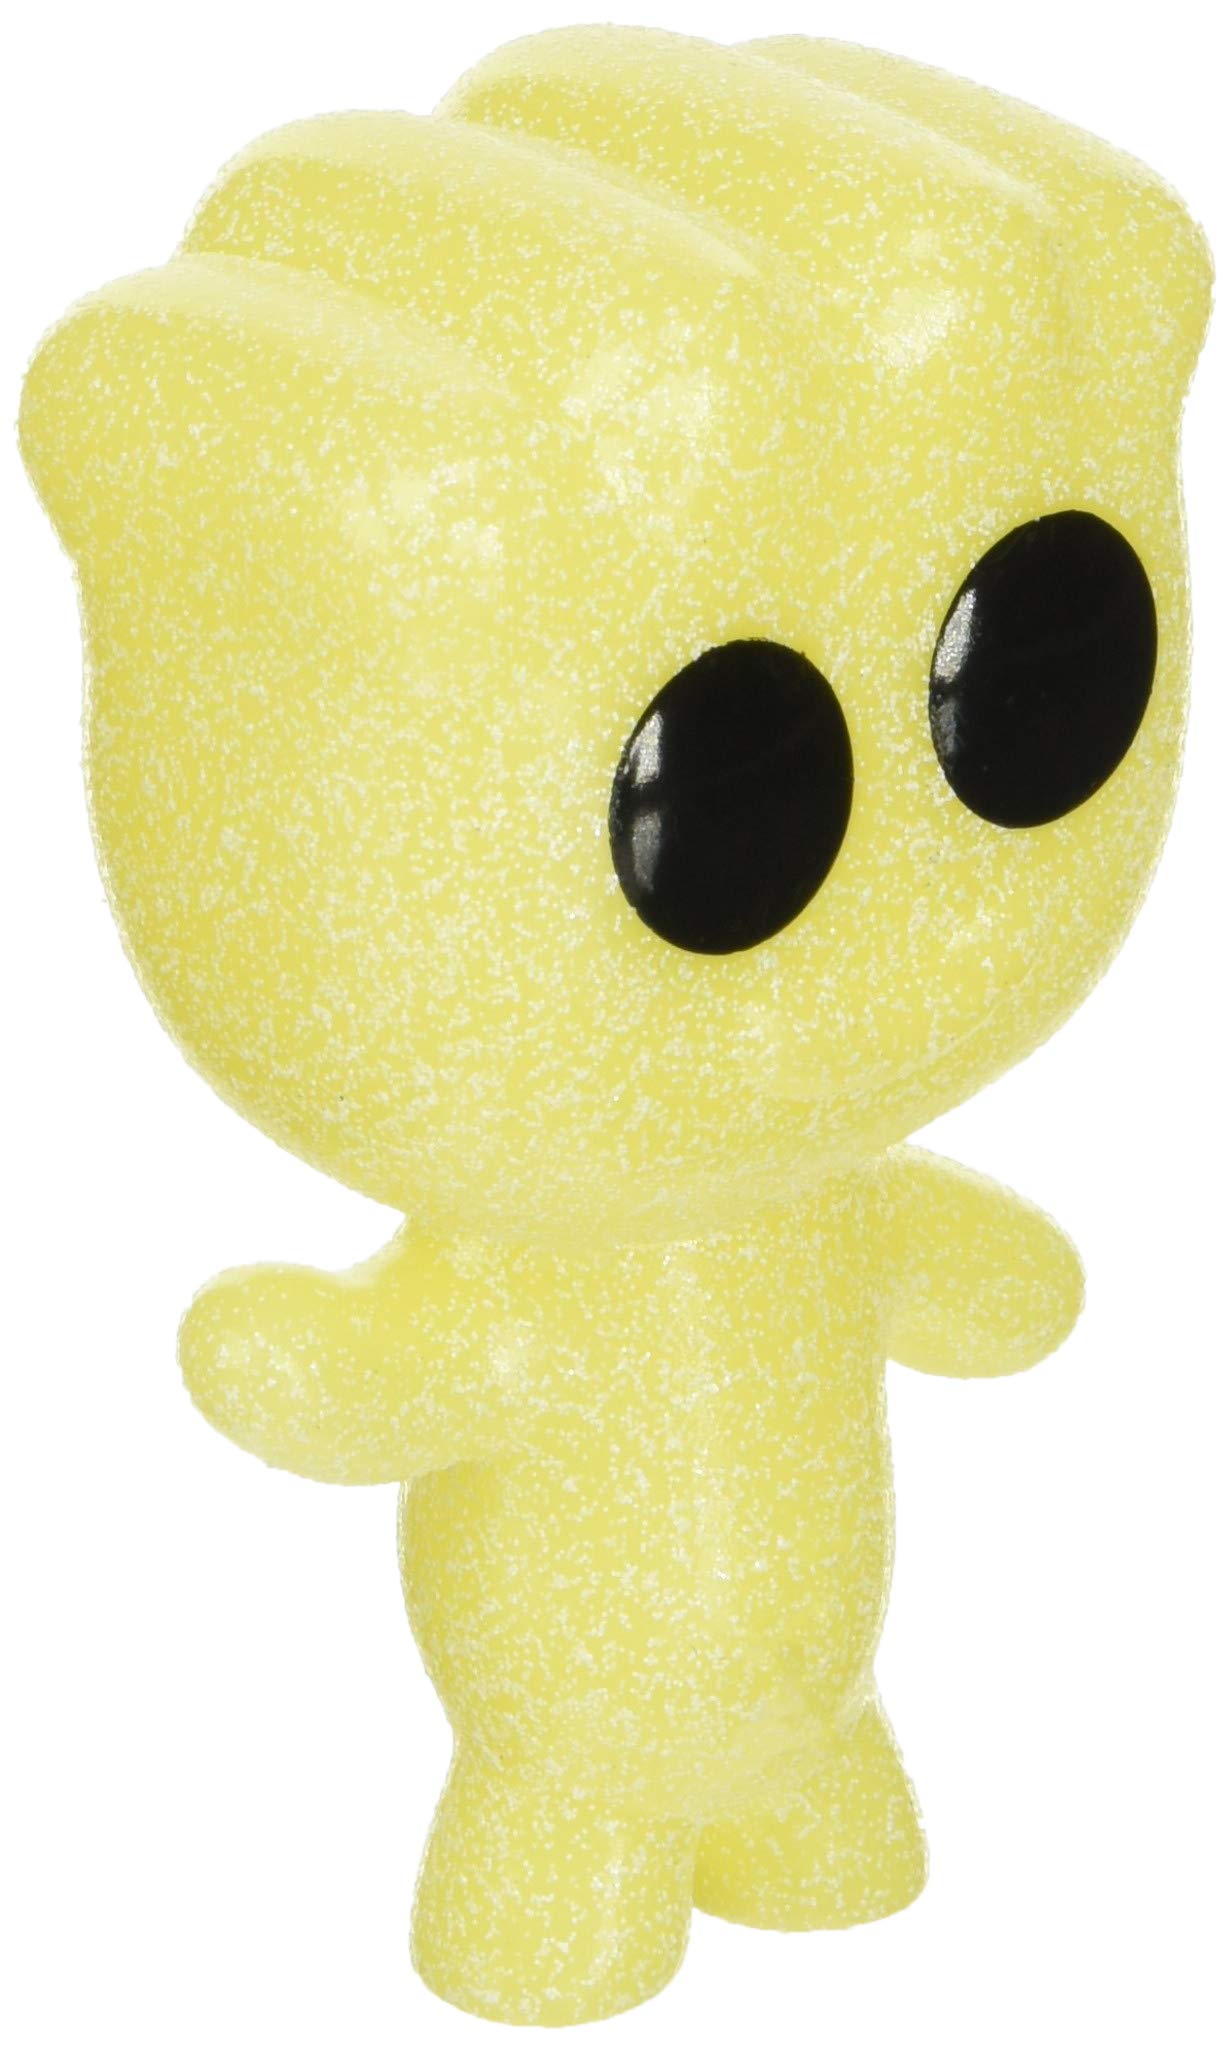 Funko POP! Candy Sour Patch Kids Yellow